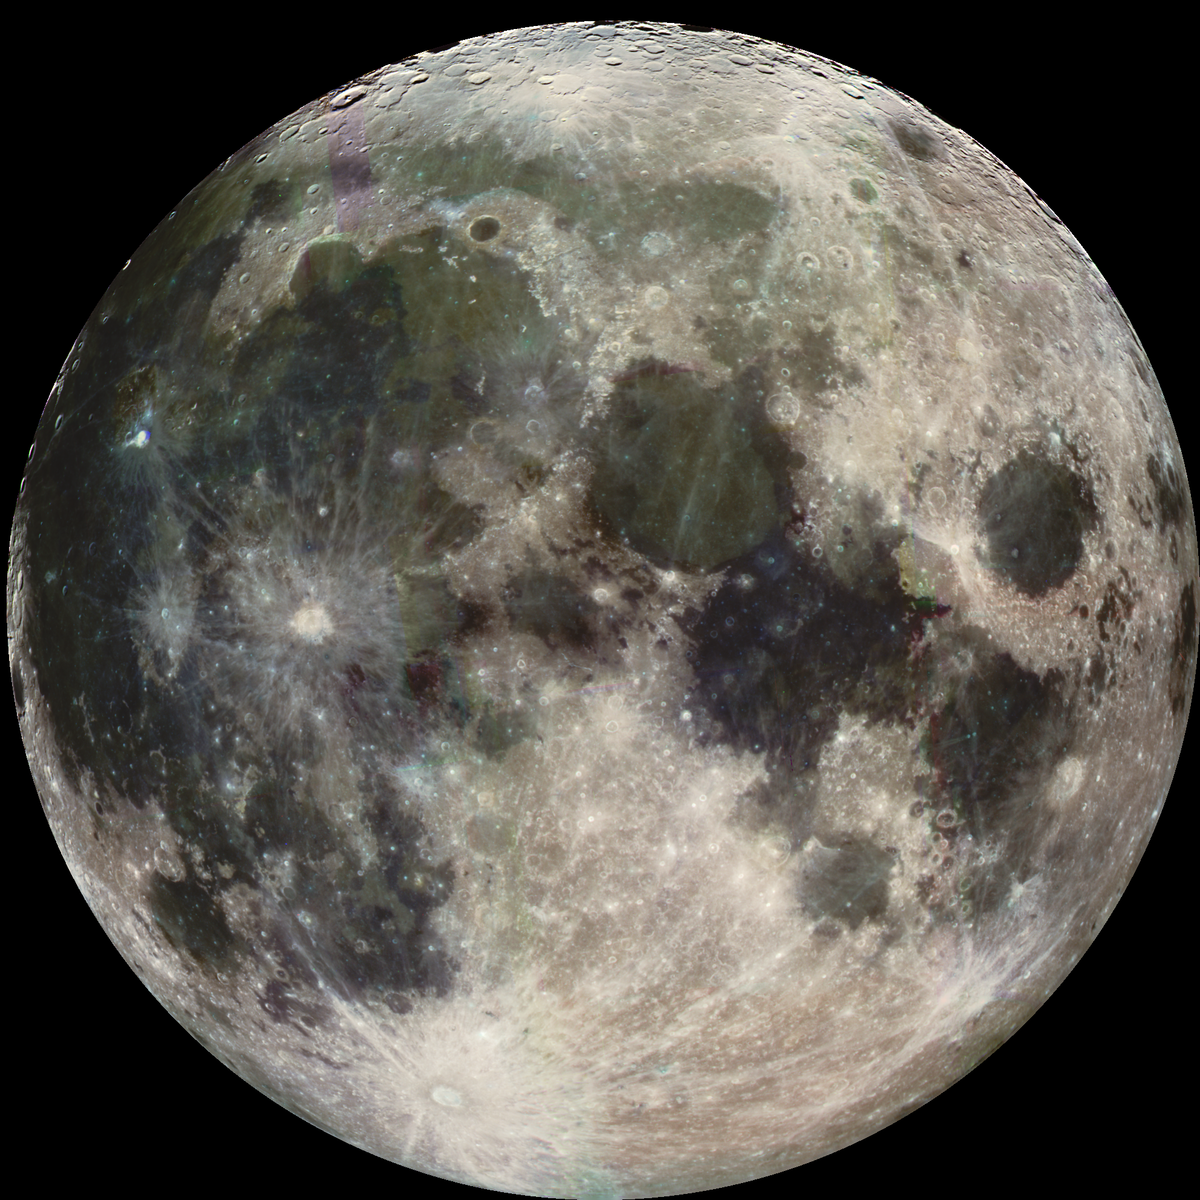 File:Full moon.png - Wikimedia Commons